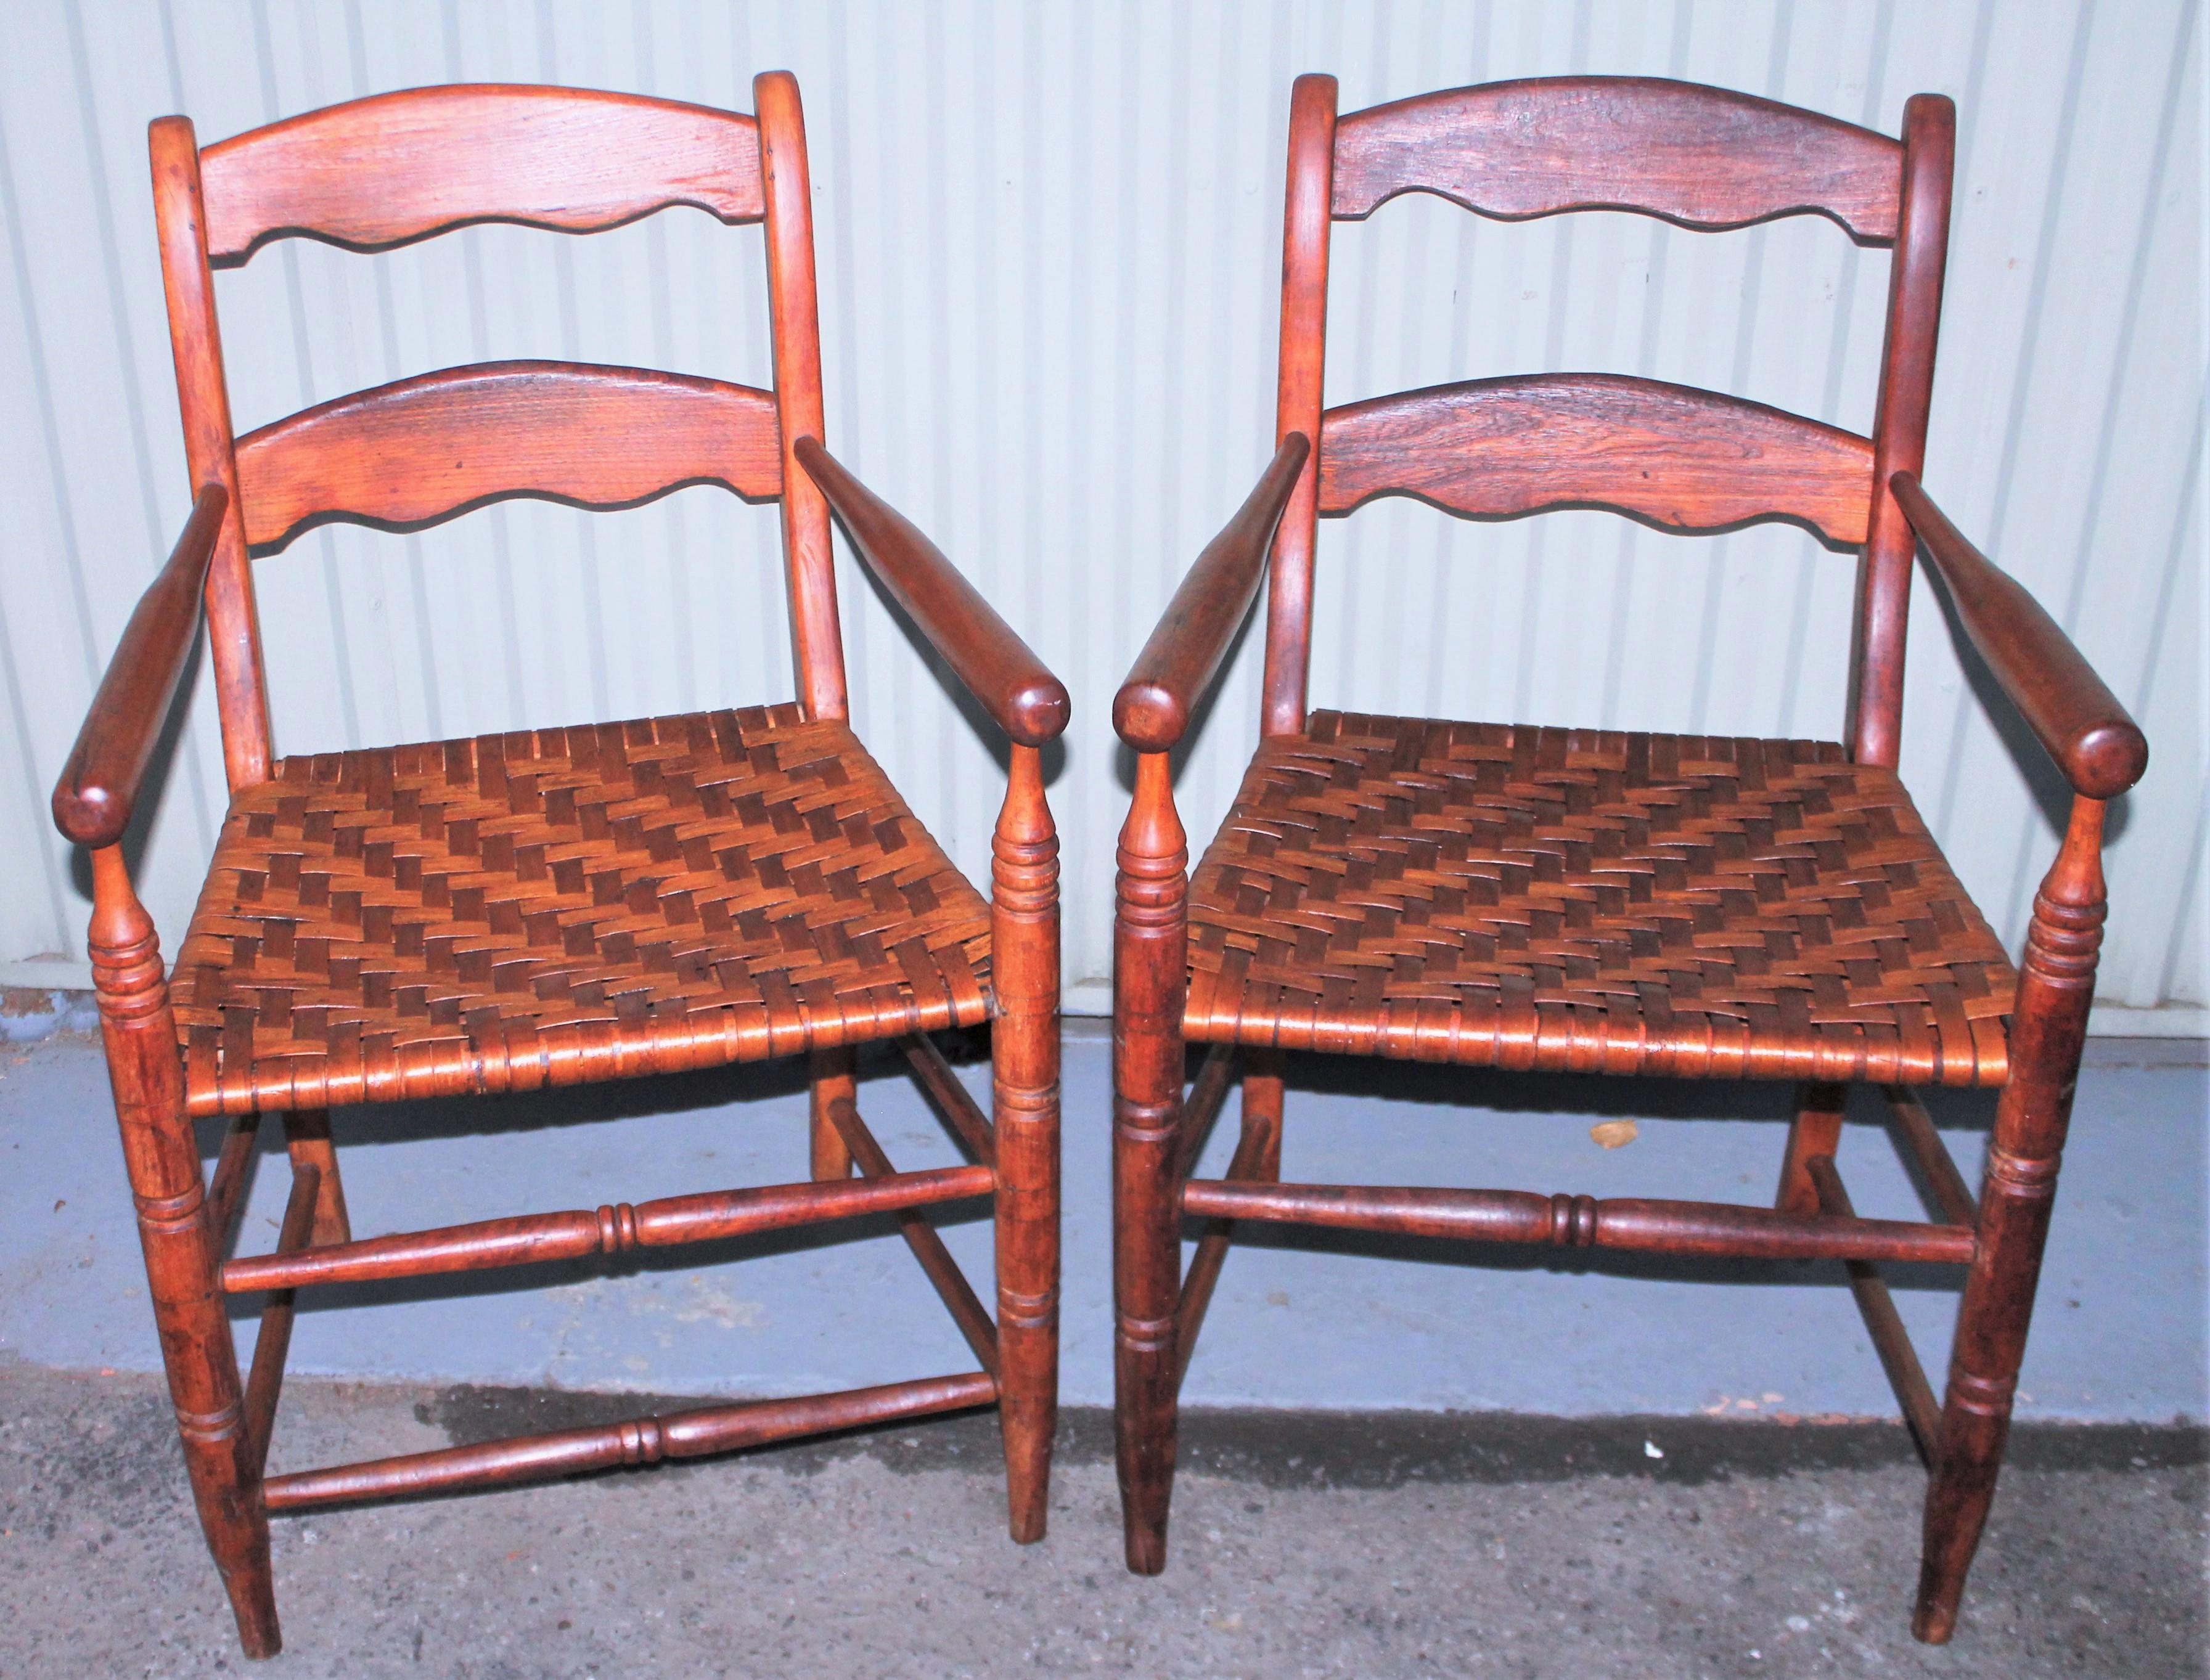 This fine pair of ladder back hickory chairs are in fine condition with a wonderful aged patina. They are in great condition and super comfortable. Sold as a perfect matched pair.